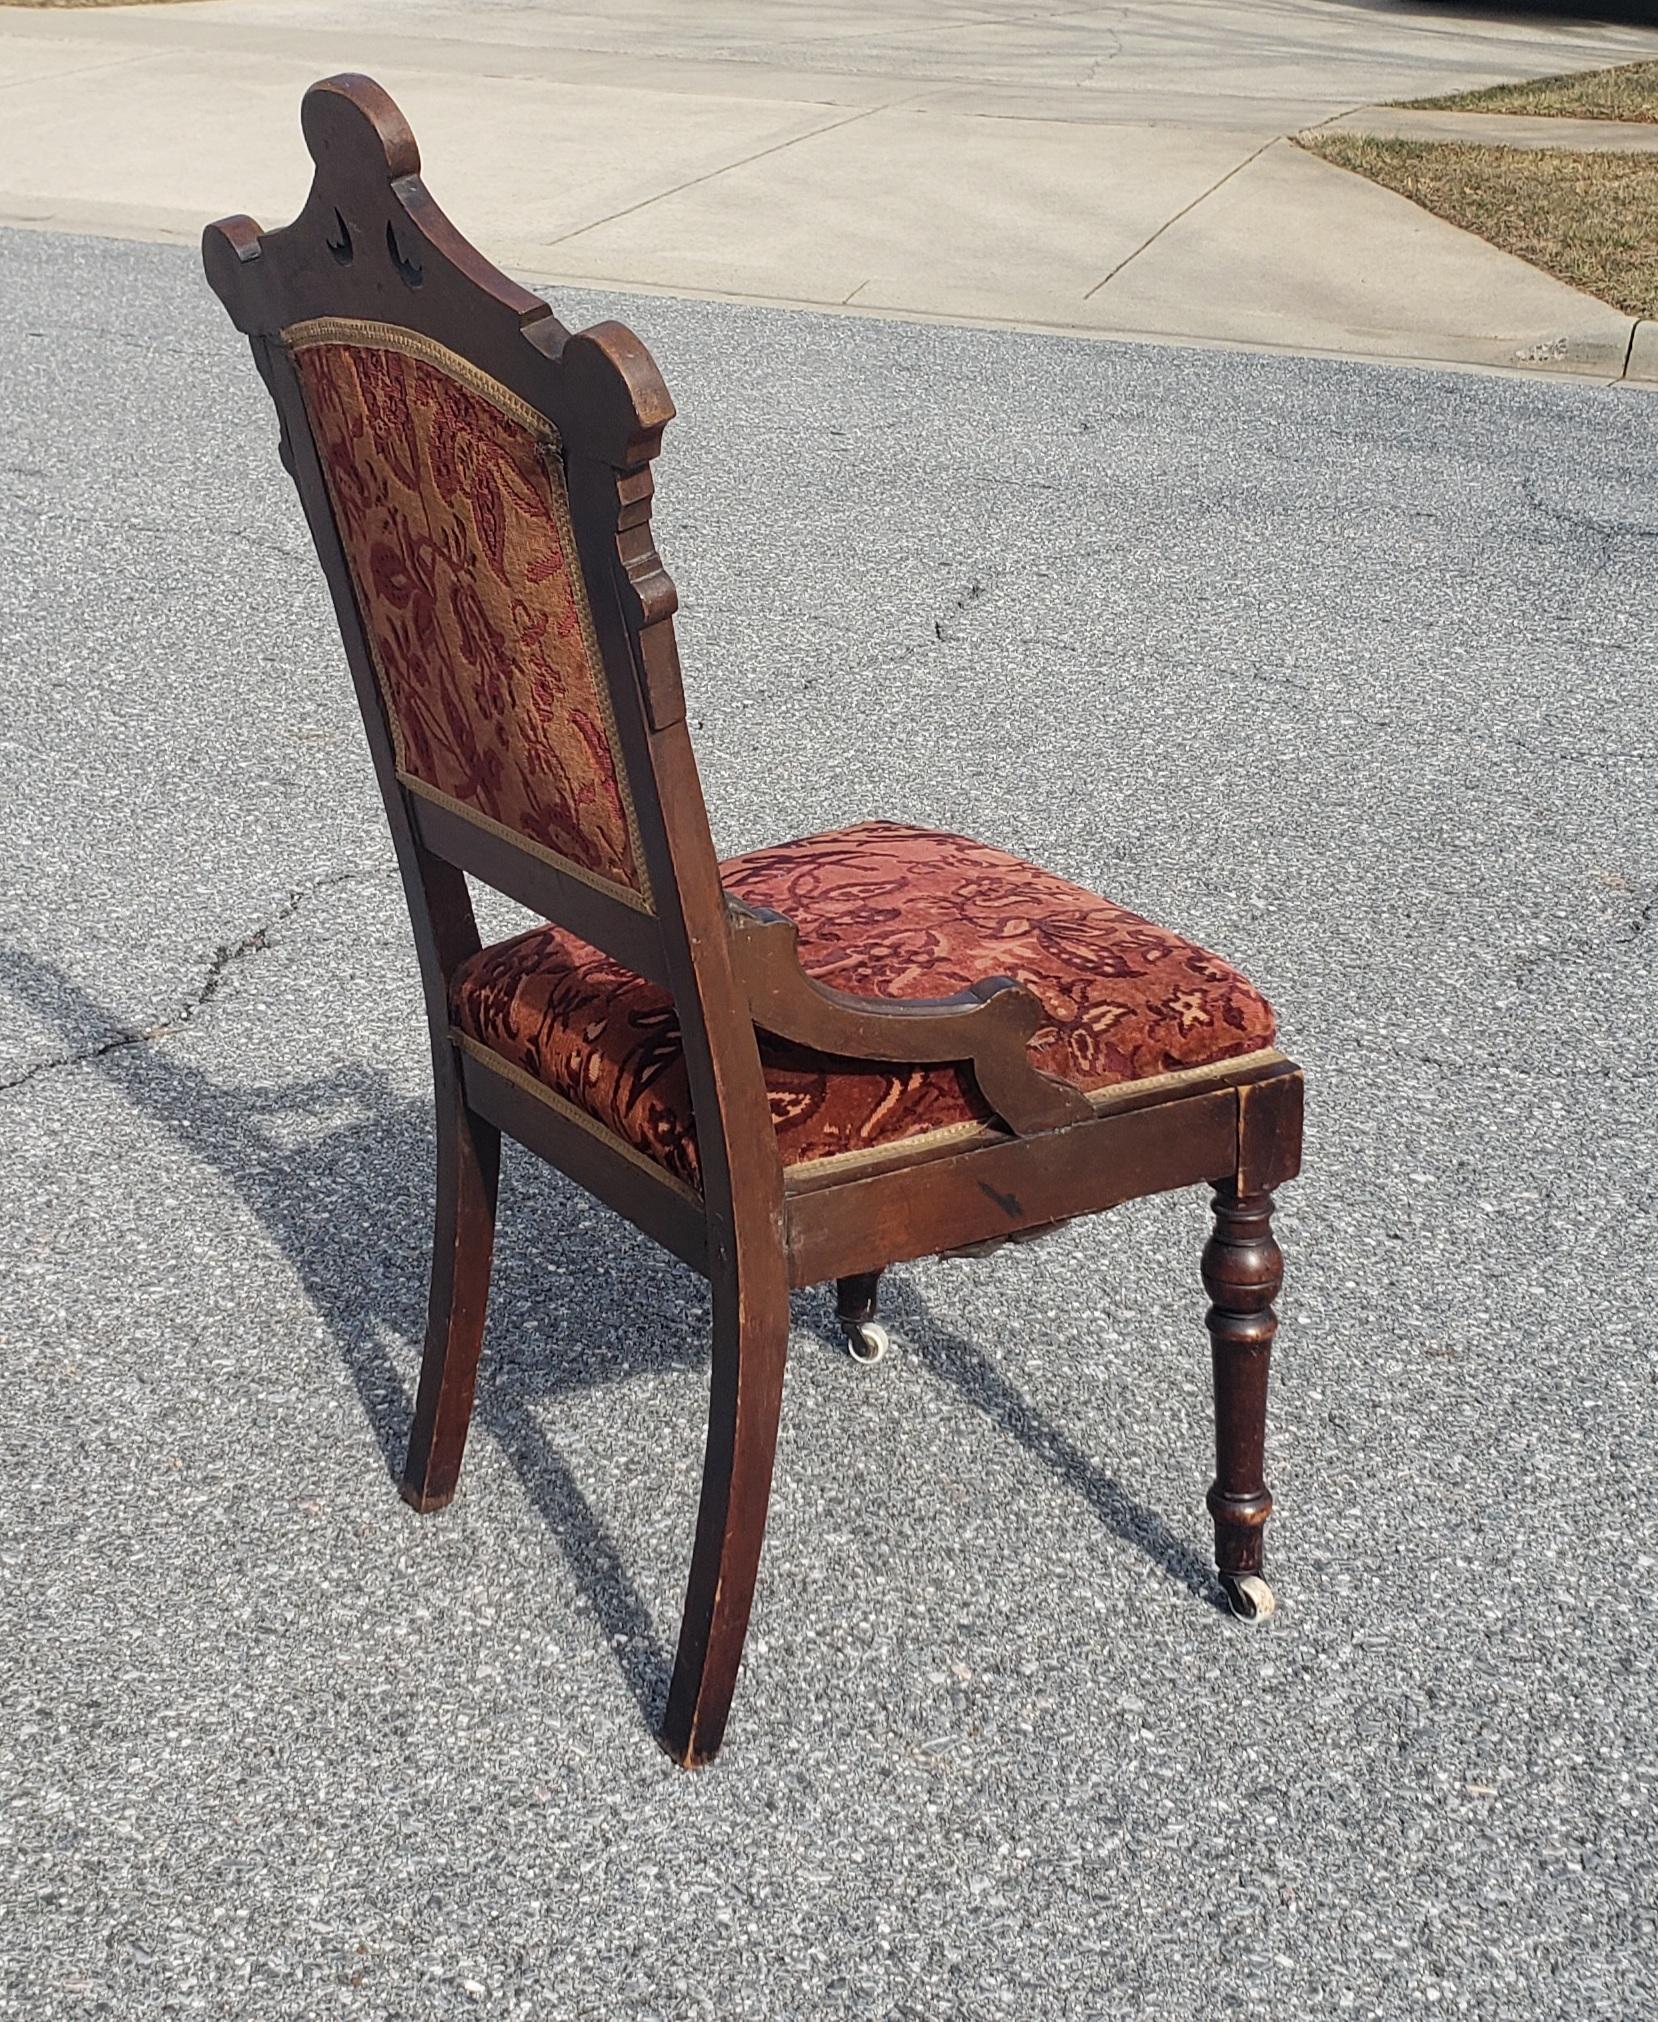 Pair of 1920s Philips & Philips Victorian Walnut and Velvet Upholstered Chairs In Good Condition For Sale In Germantown, MD